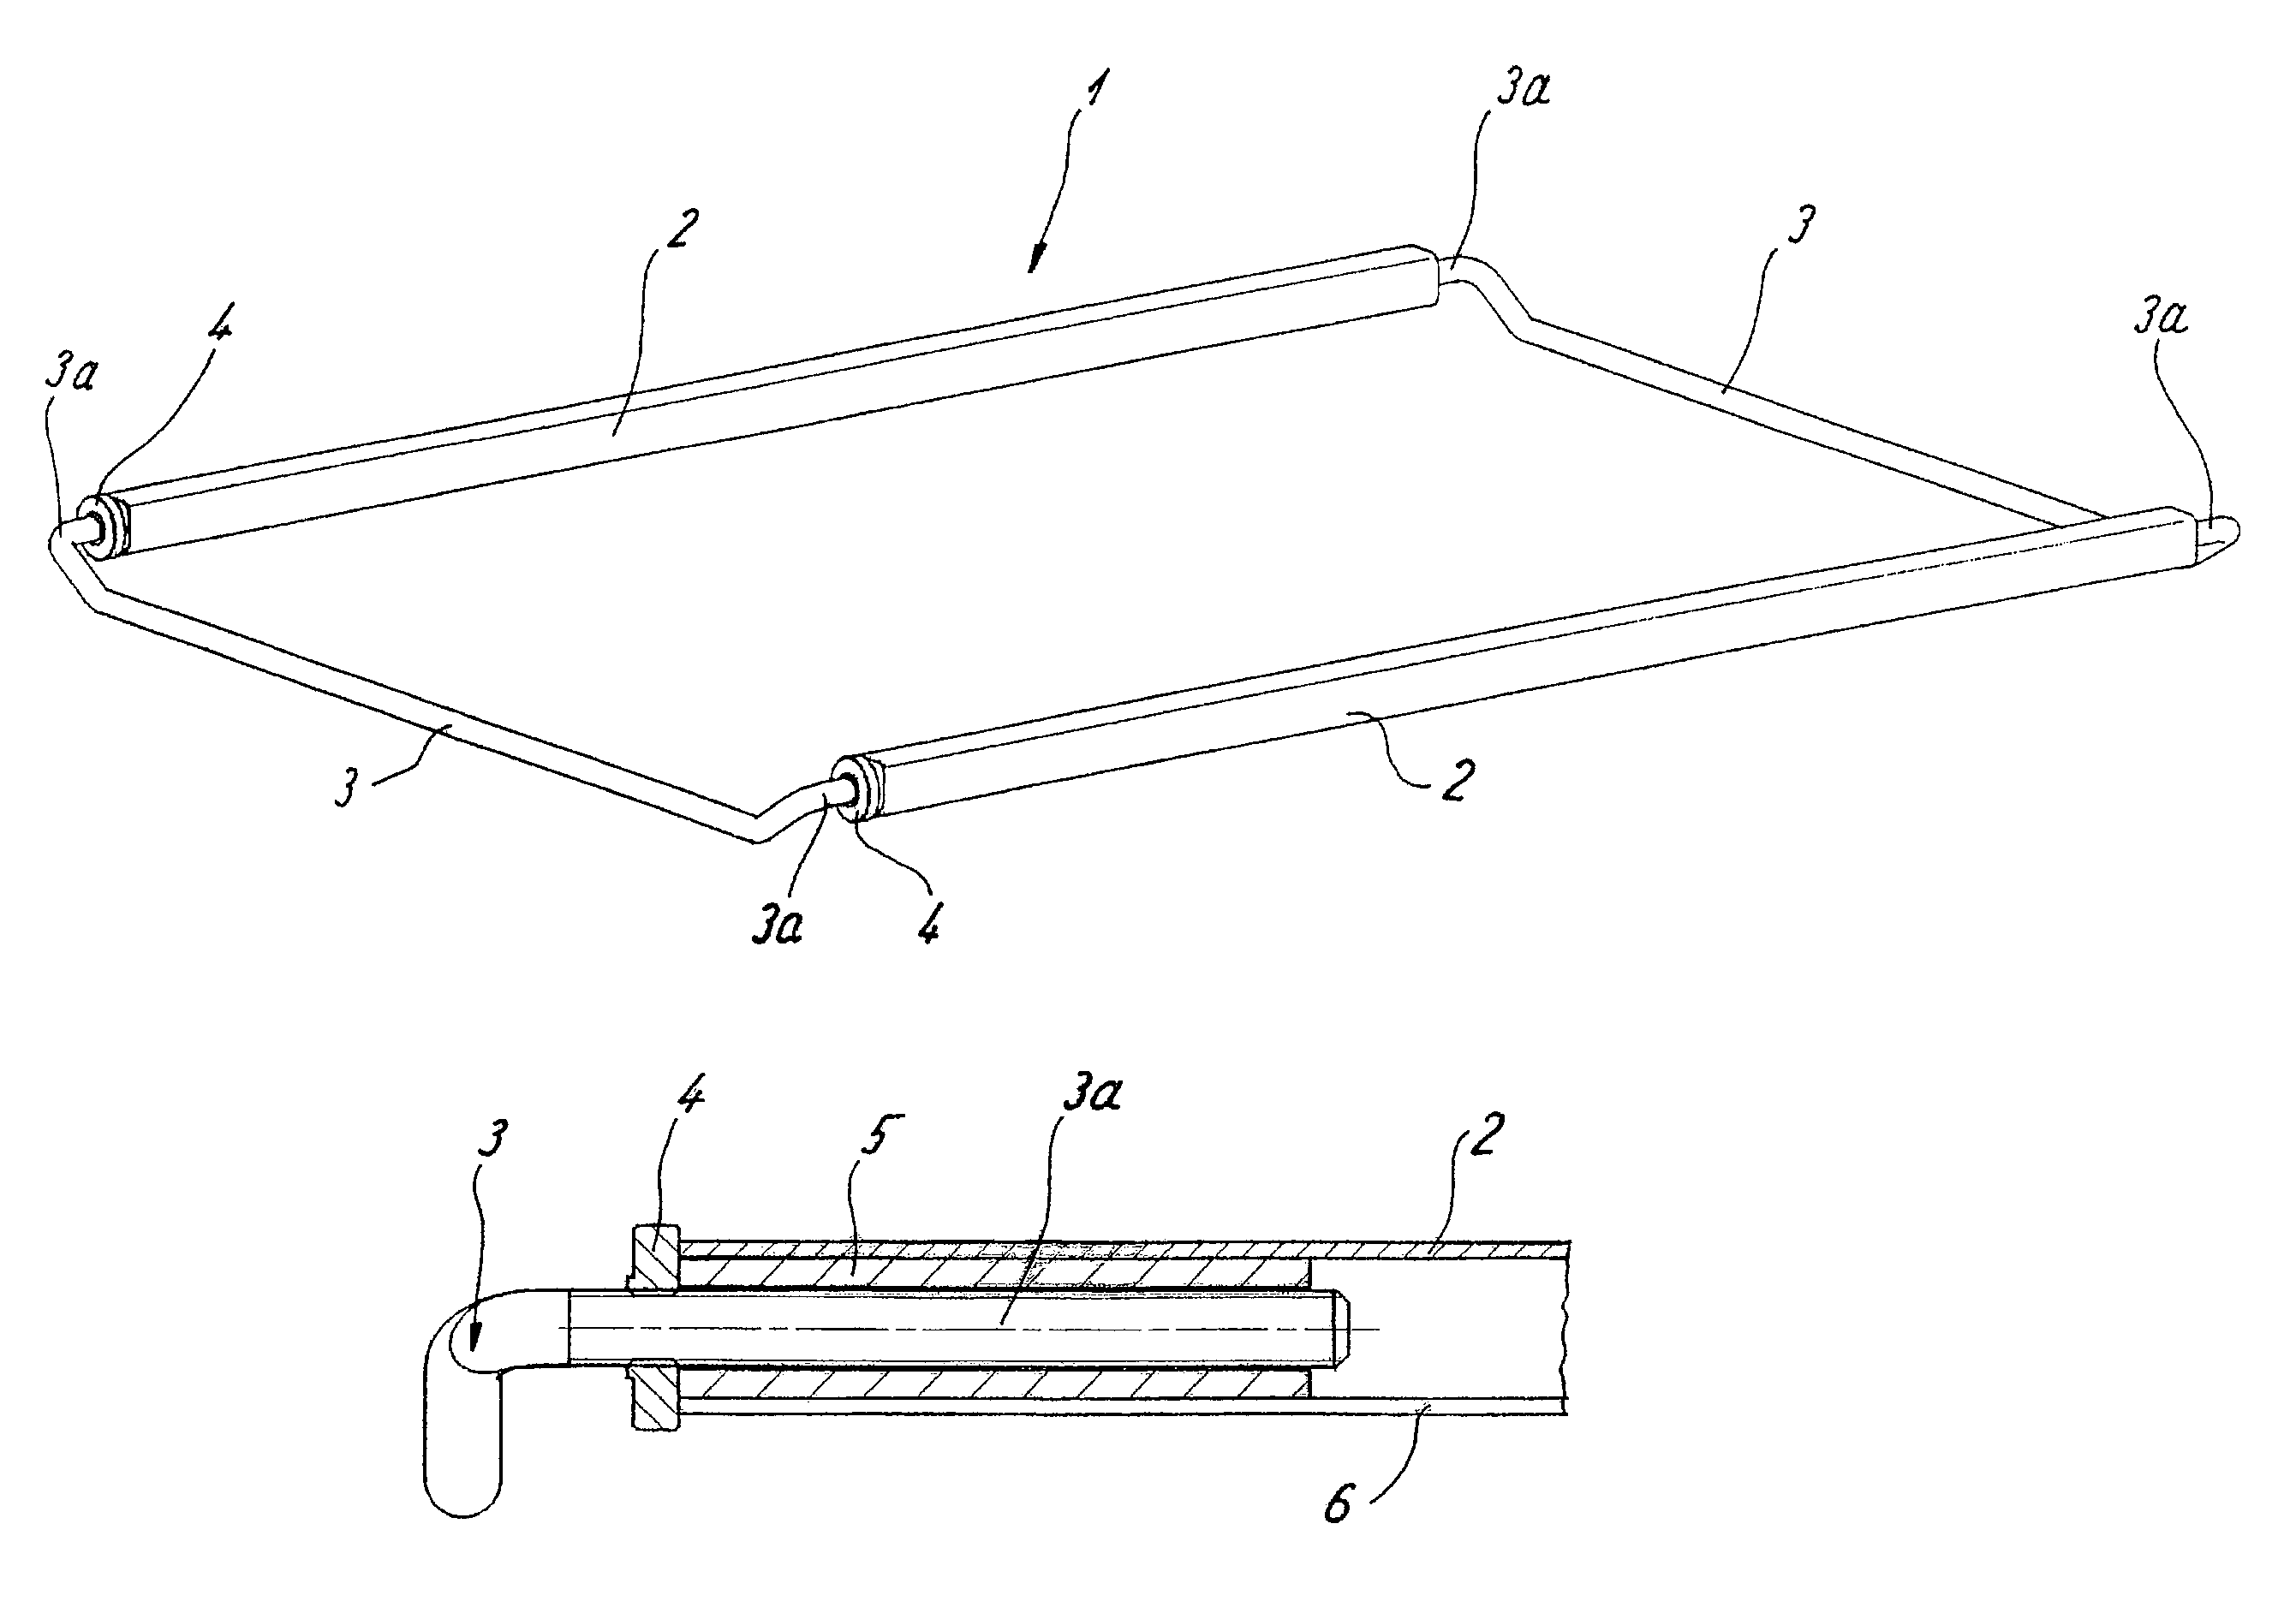 Width-adjustable carrier frame usable in household appliances, particularly in cooking and baking ovens